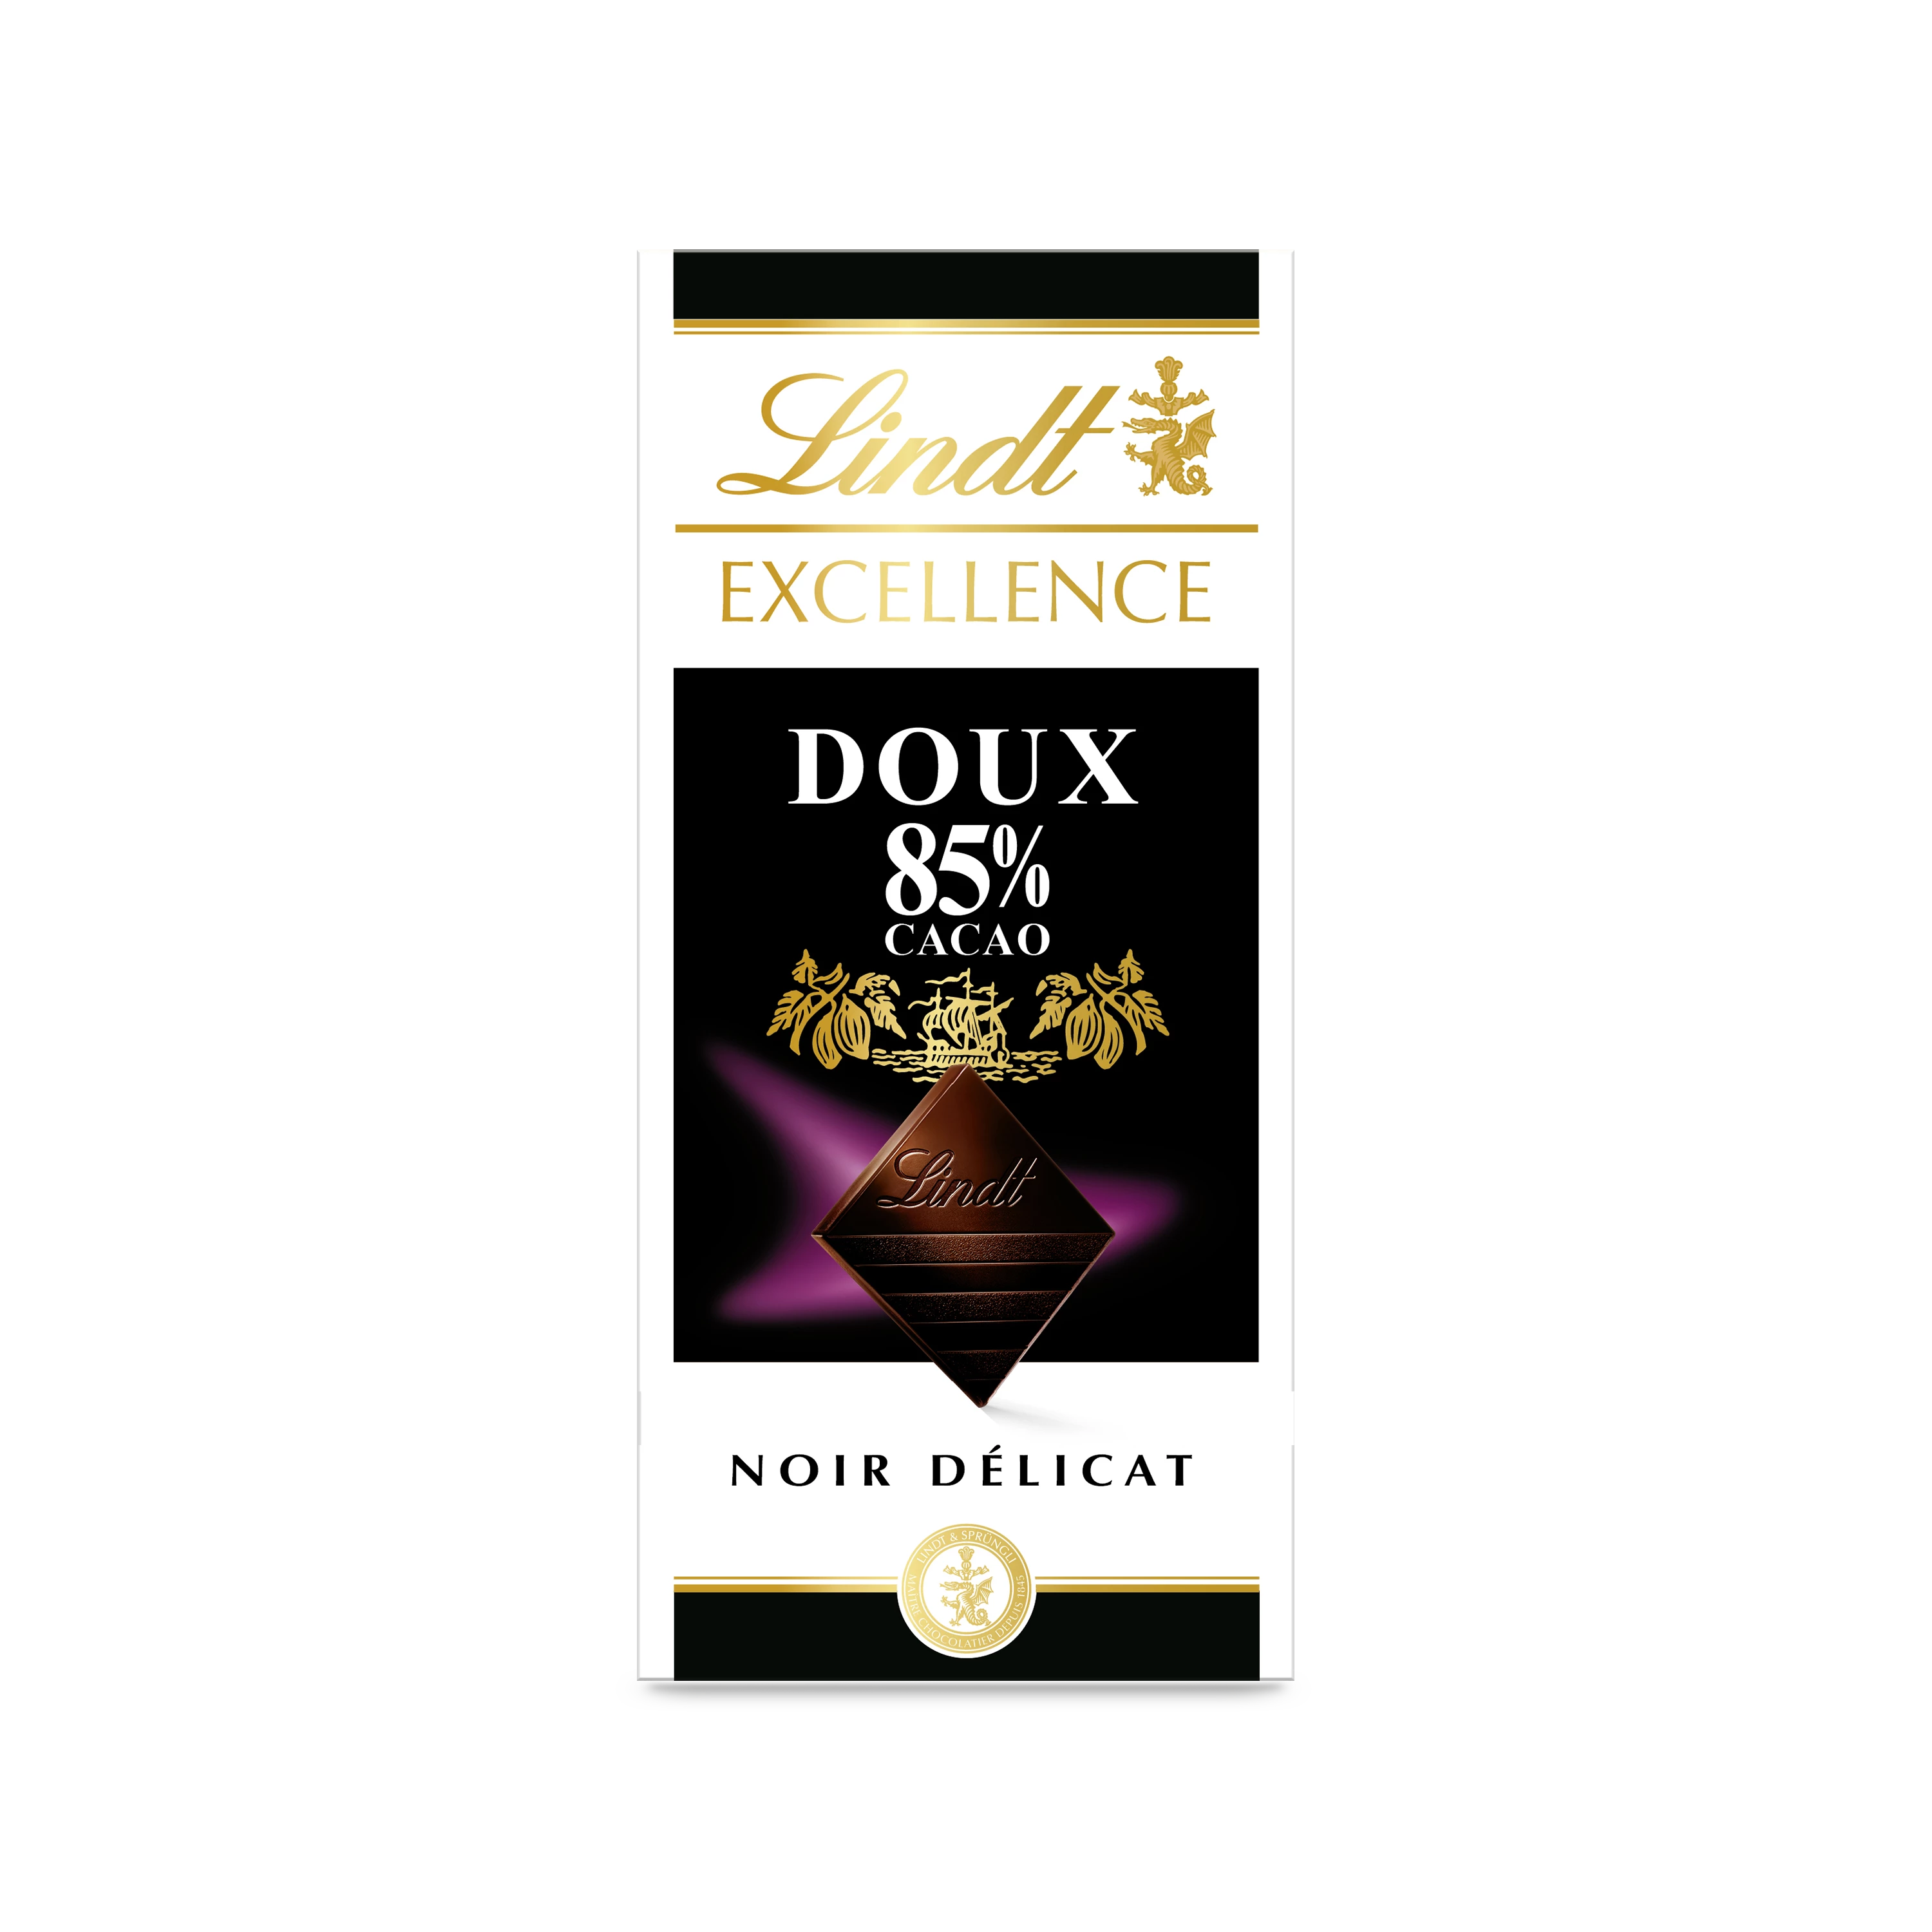 Excellence Fondente 85% Cacao Dolce Tavoletta 100 G - LINDT